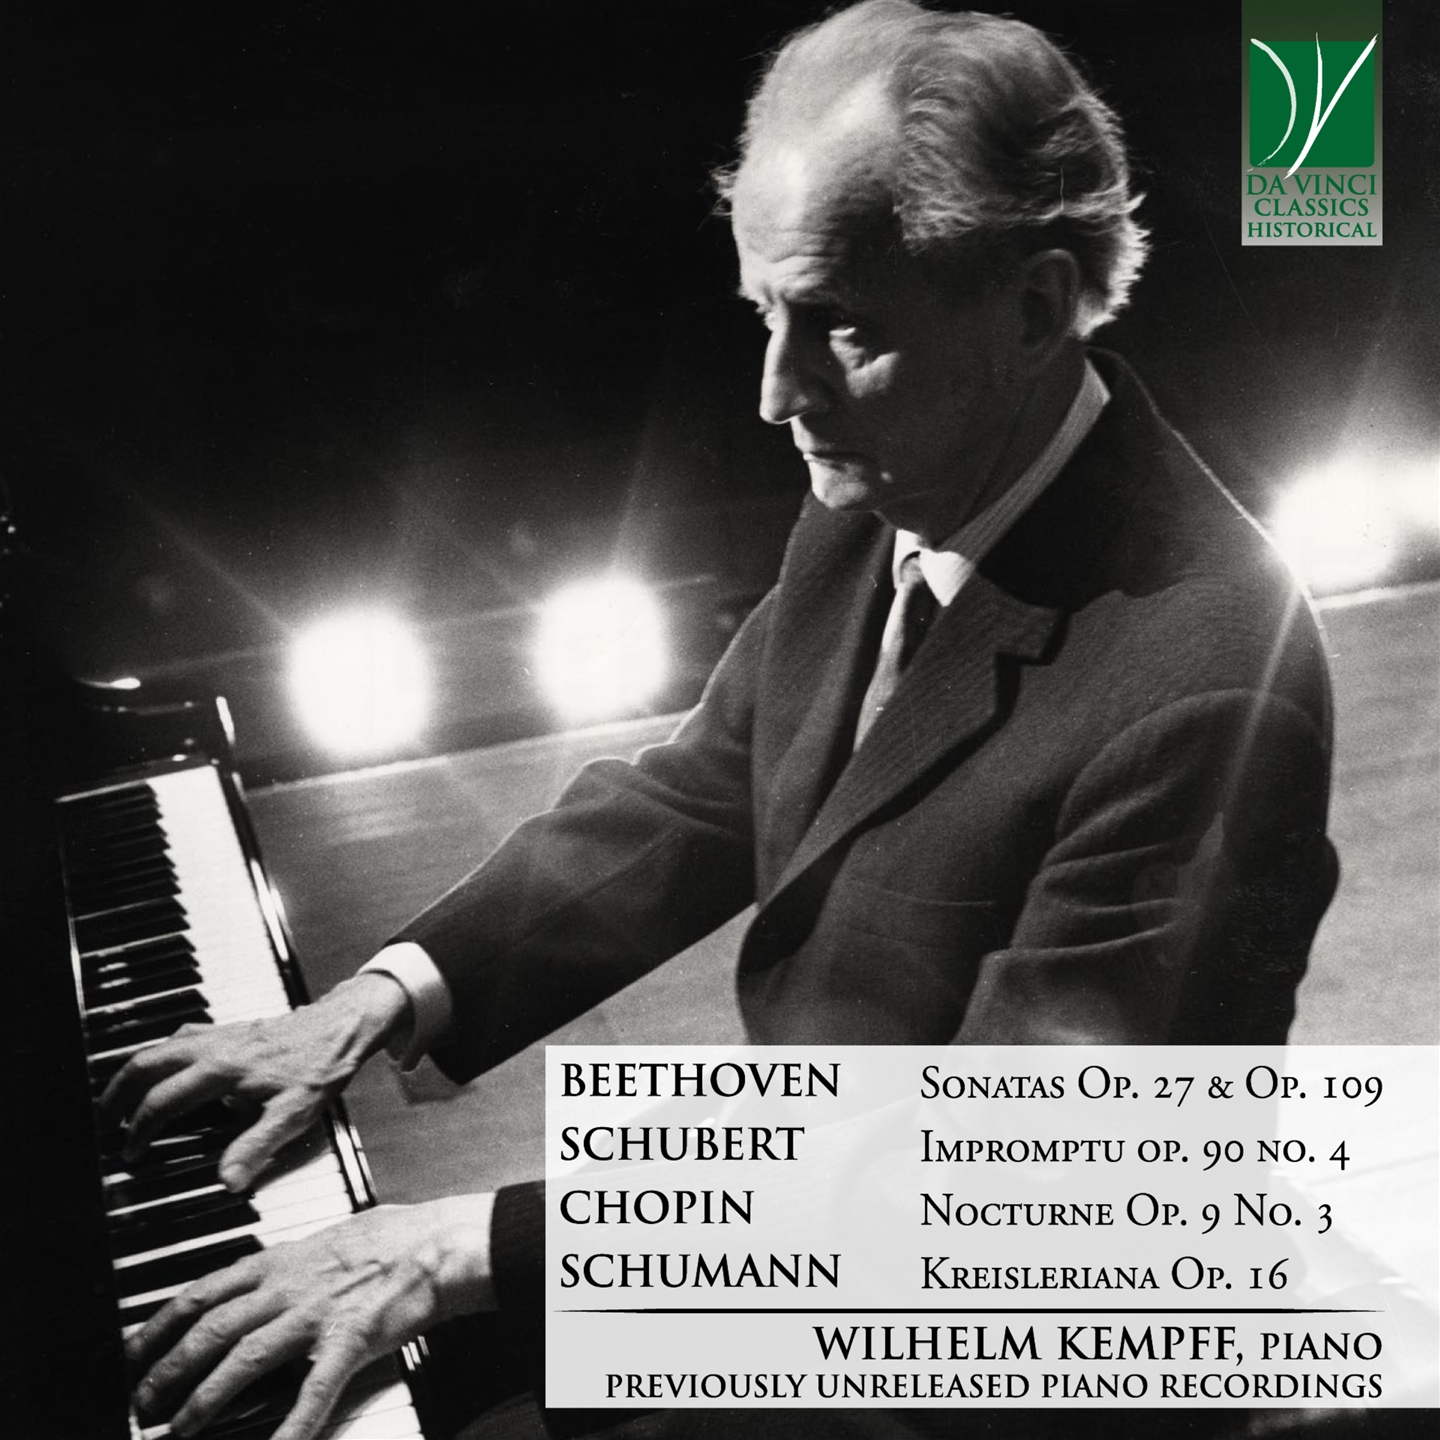 BEETHOVEN, CHOPIN, SCHUBERT, SCHUMANN: PIANO MUSIC (HISTORICAL LIVE RECORDINGS)